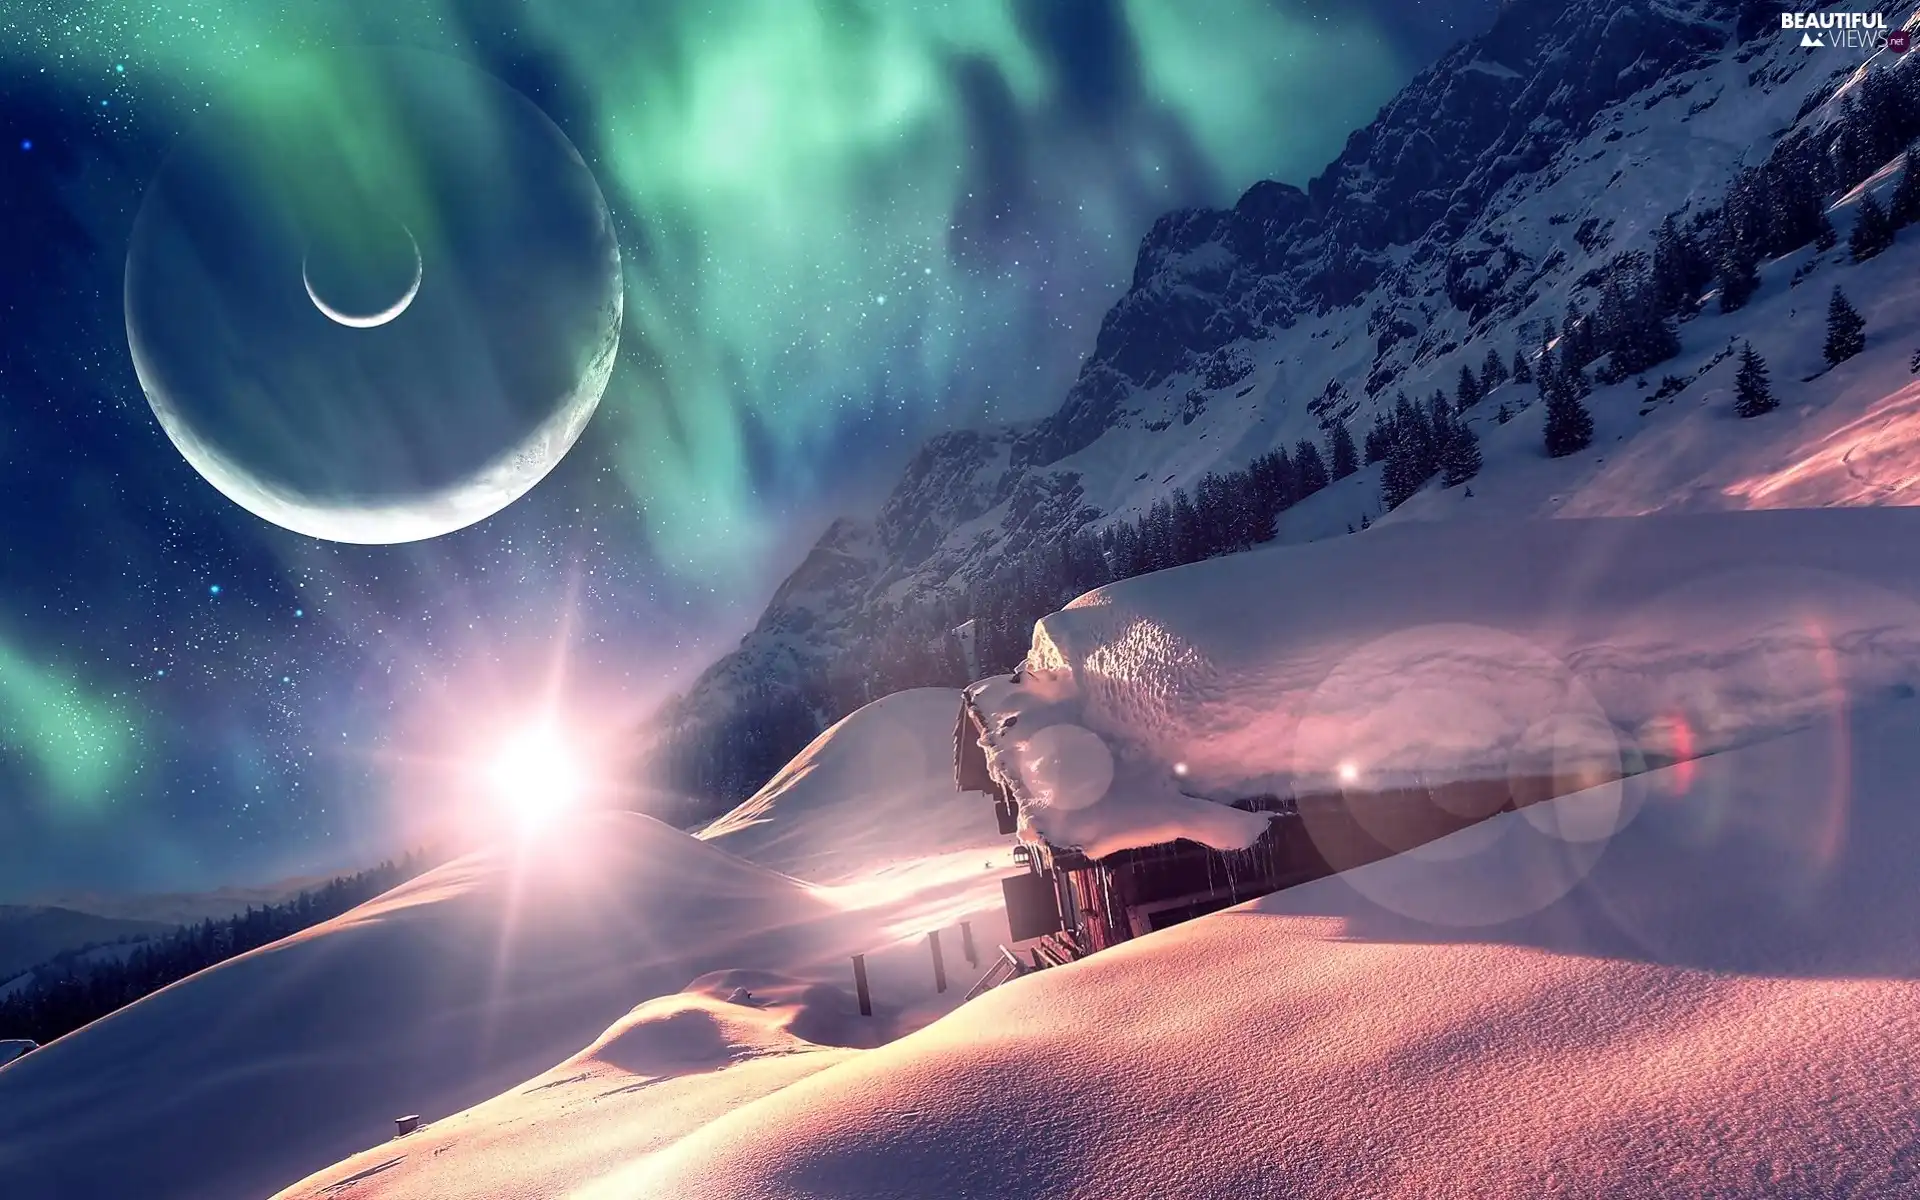 dawn, winter, Planets, Mountains, fantasy, rays of the Sun, house